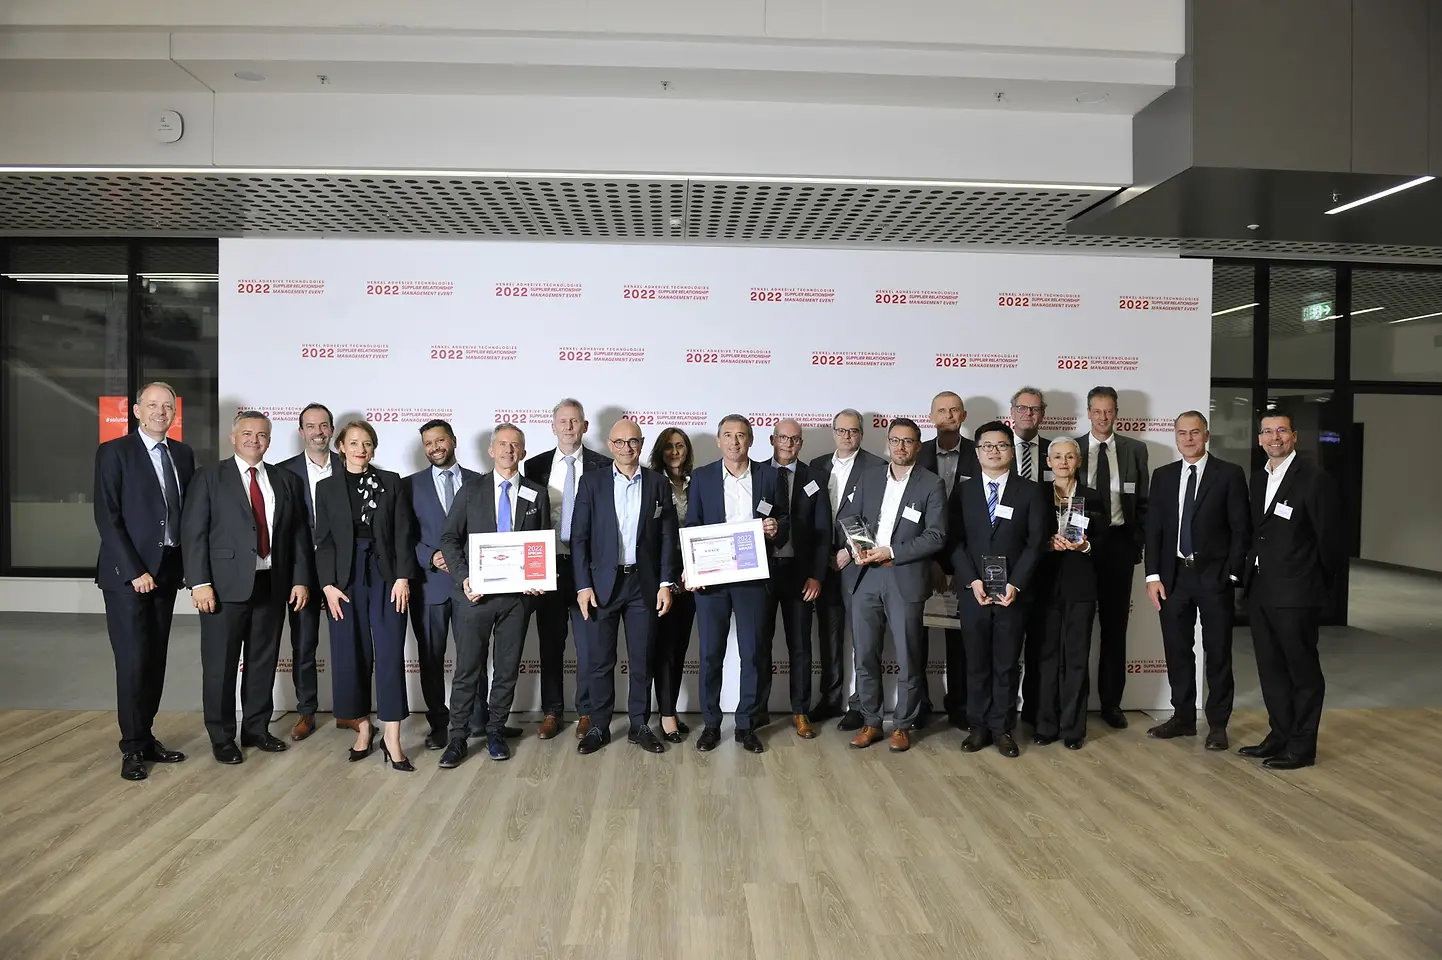 
With the annual Supplier Awards recognitions in the categories Sustainability, Innovation and Operational Excellence the business unit honors the close and successful collaboration across its value chains.